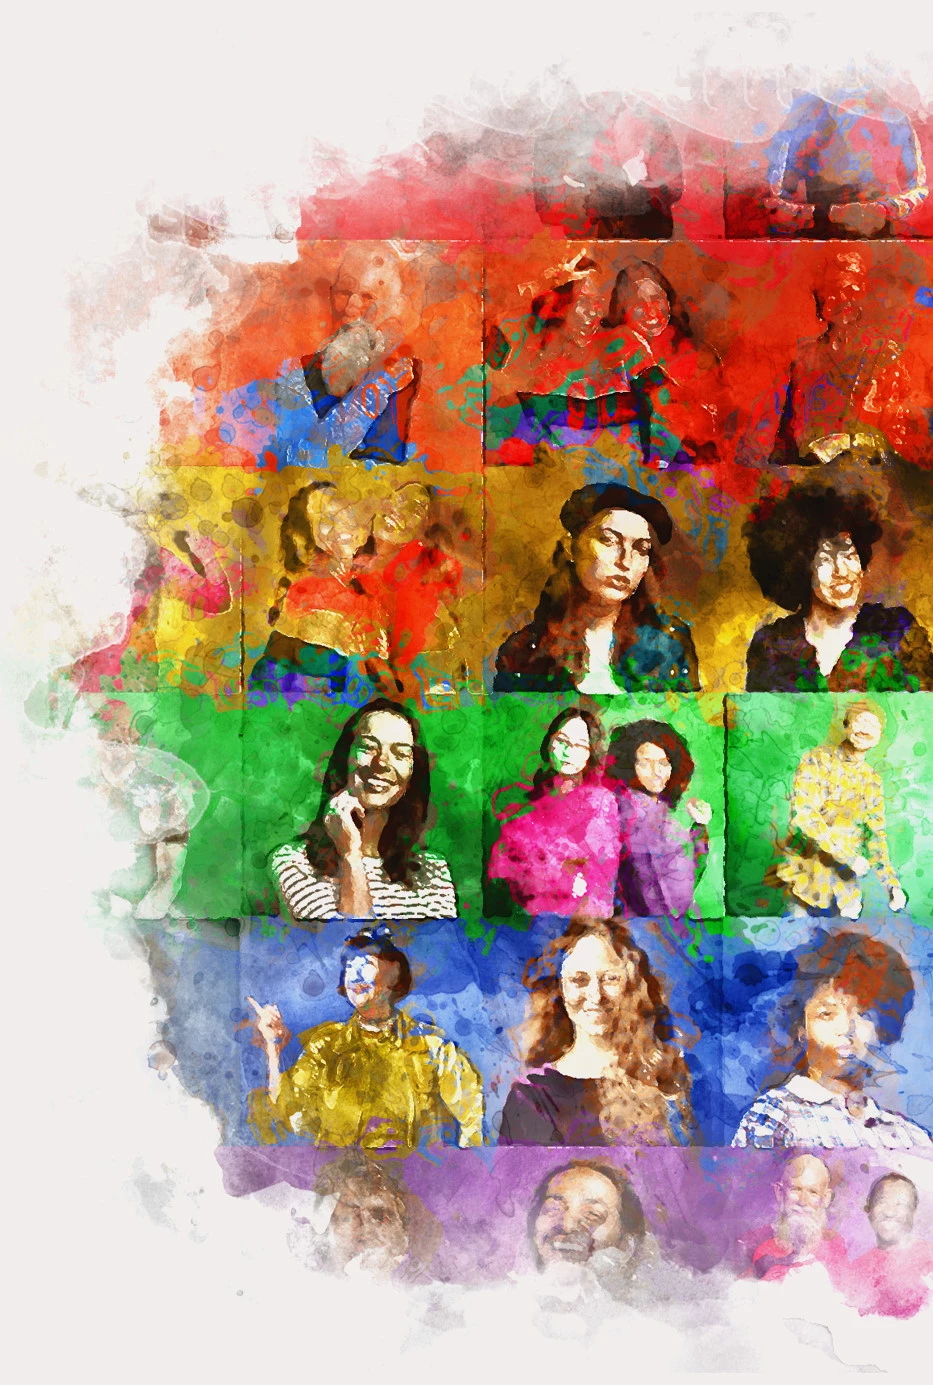 A collage of portraits of different people with an abstract touch of different colors on them.